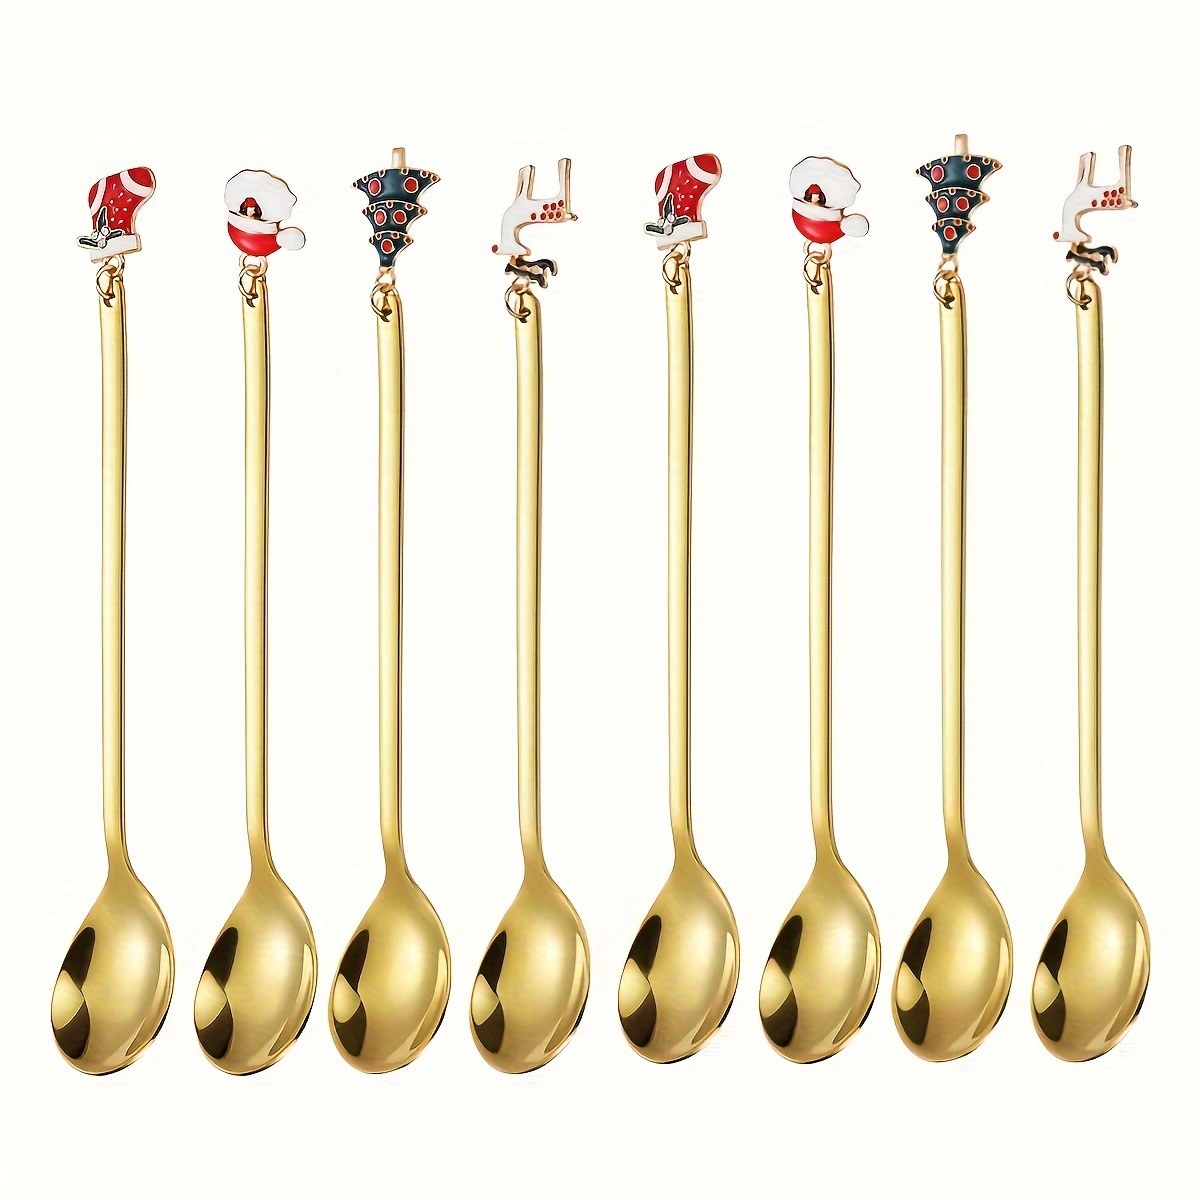 4x Long Christmas Metal Spoons Set Xmas Party Cutlery Stainless Steel  Dessert Spoons Sugar Spoons for Latte Ice Cream Macchiato - AliExpress